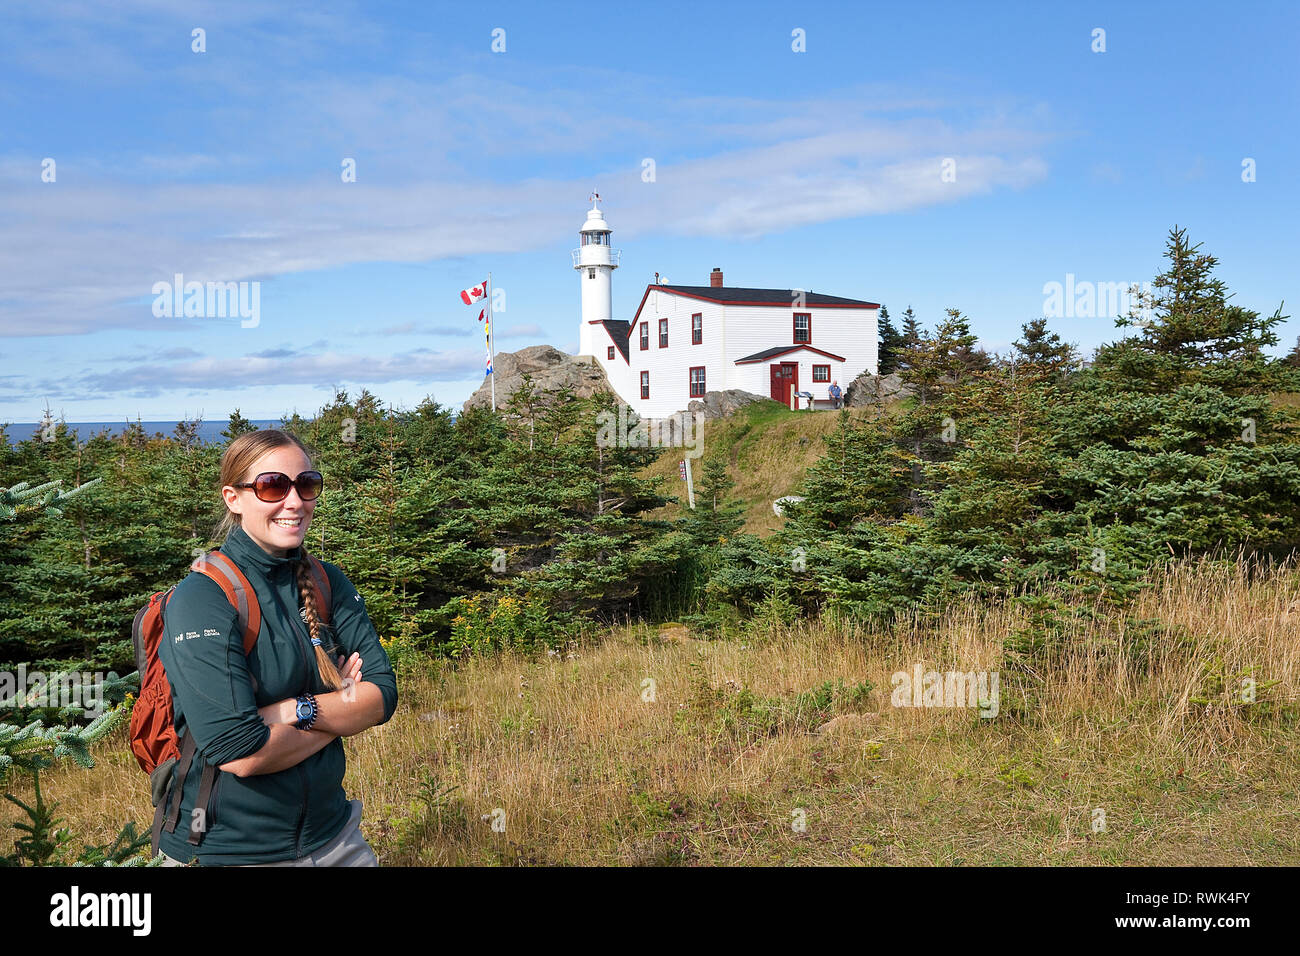 Parks Canada interpreter in front of the Lobster Cove Head Lighthouse and the lighthouse keeper's home which now serves as an interpretive exhibit. Rocky Harbour, Gros Morne National Park, Newfoundland, Canada Stock Photo